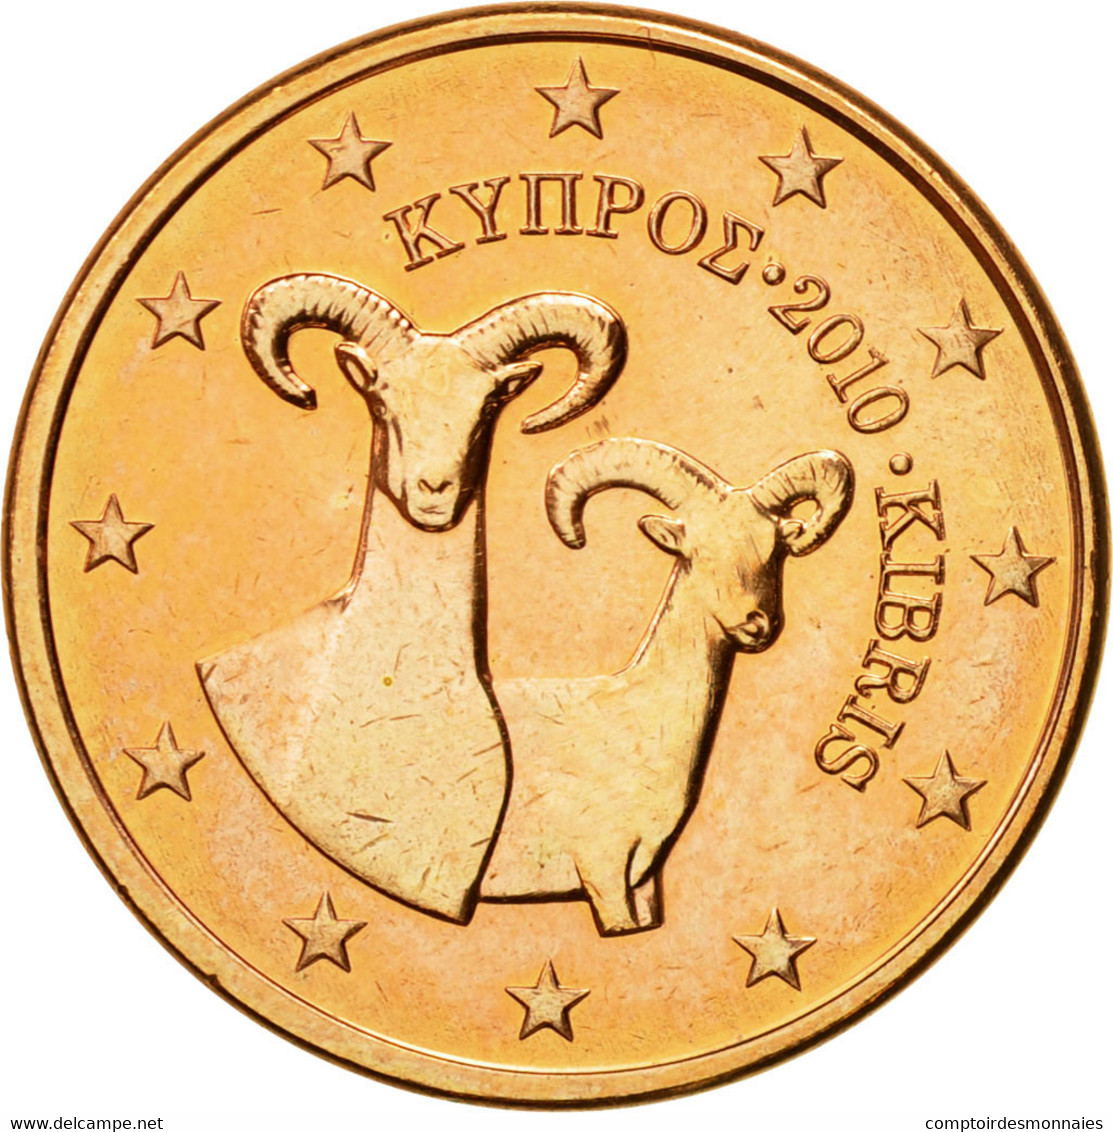 Chypre, 5 Euro Cent, 2010, FDC, Copper Plated Steel, KM:80 - Zypern